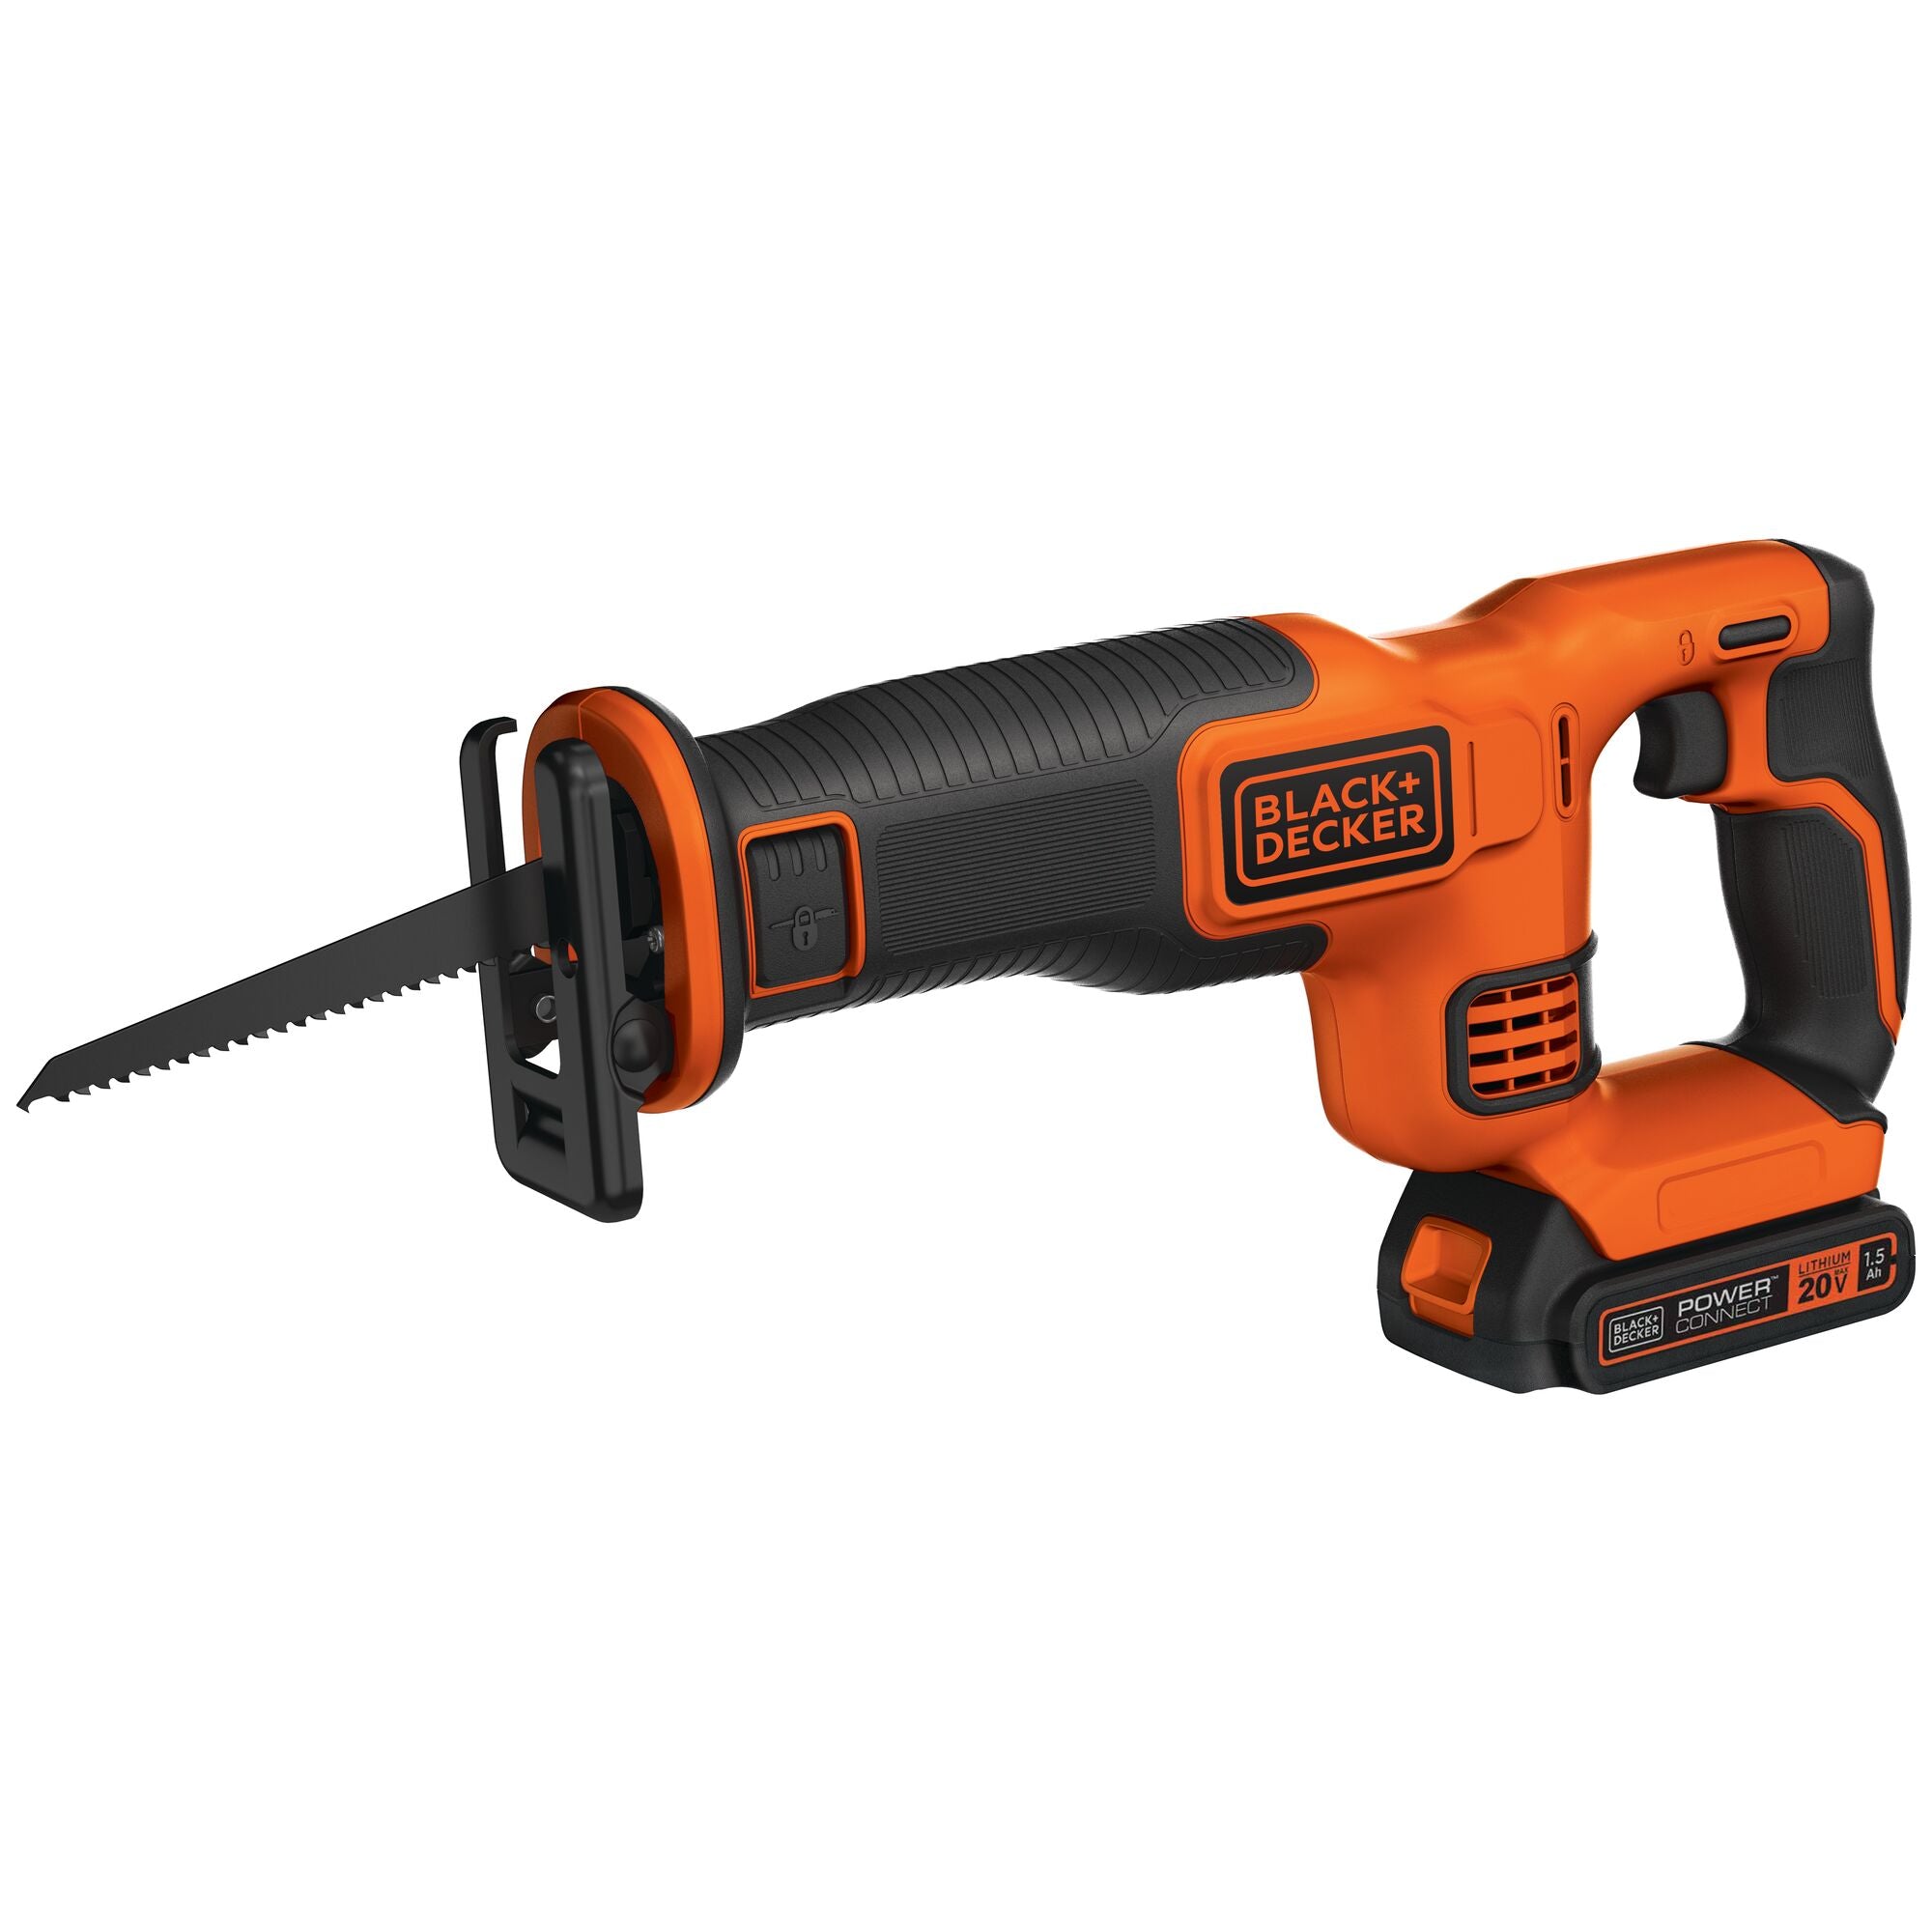 Black and Decker 20V MAX Reciprocating Saw Lithium Cordless Kit BDCR20C  from Black and Decker - Acme Tools